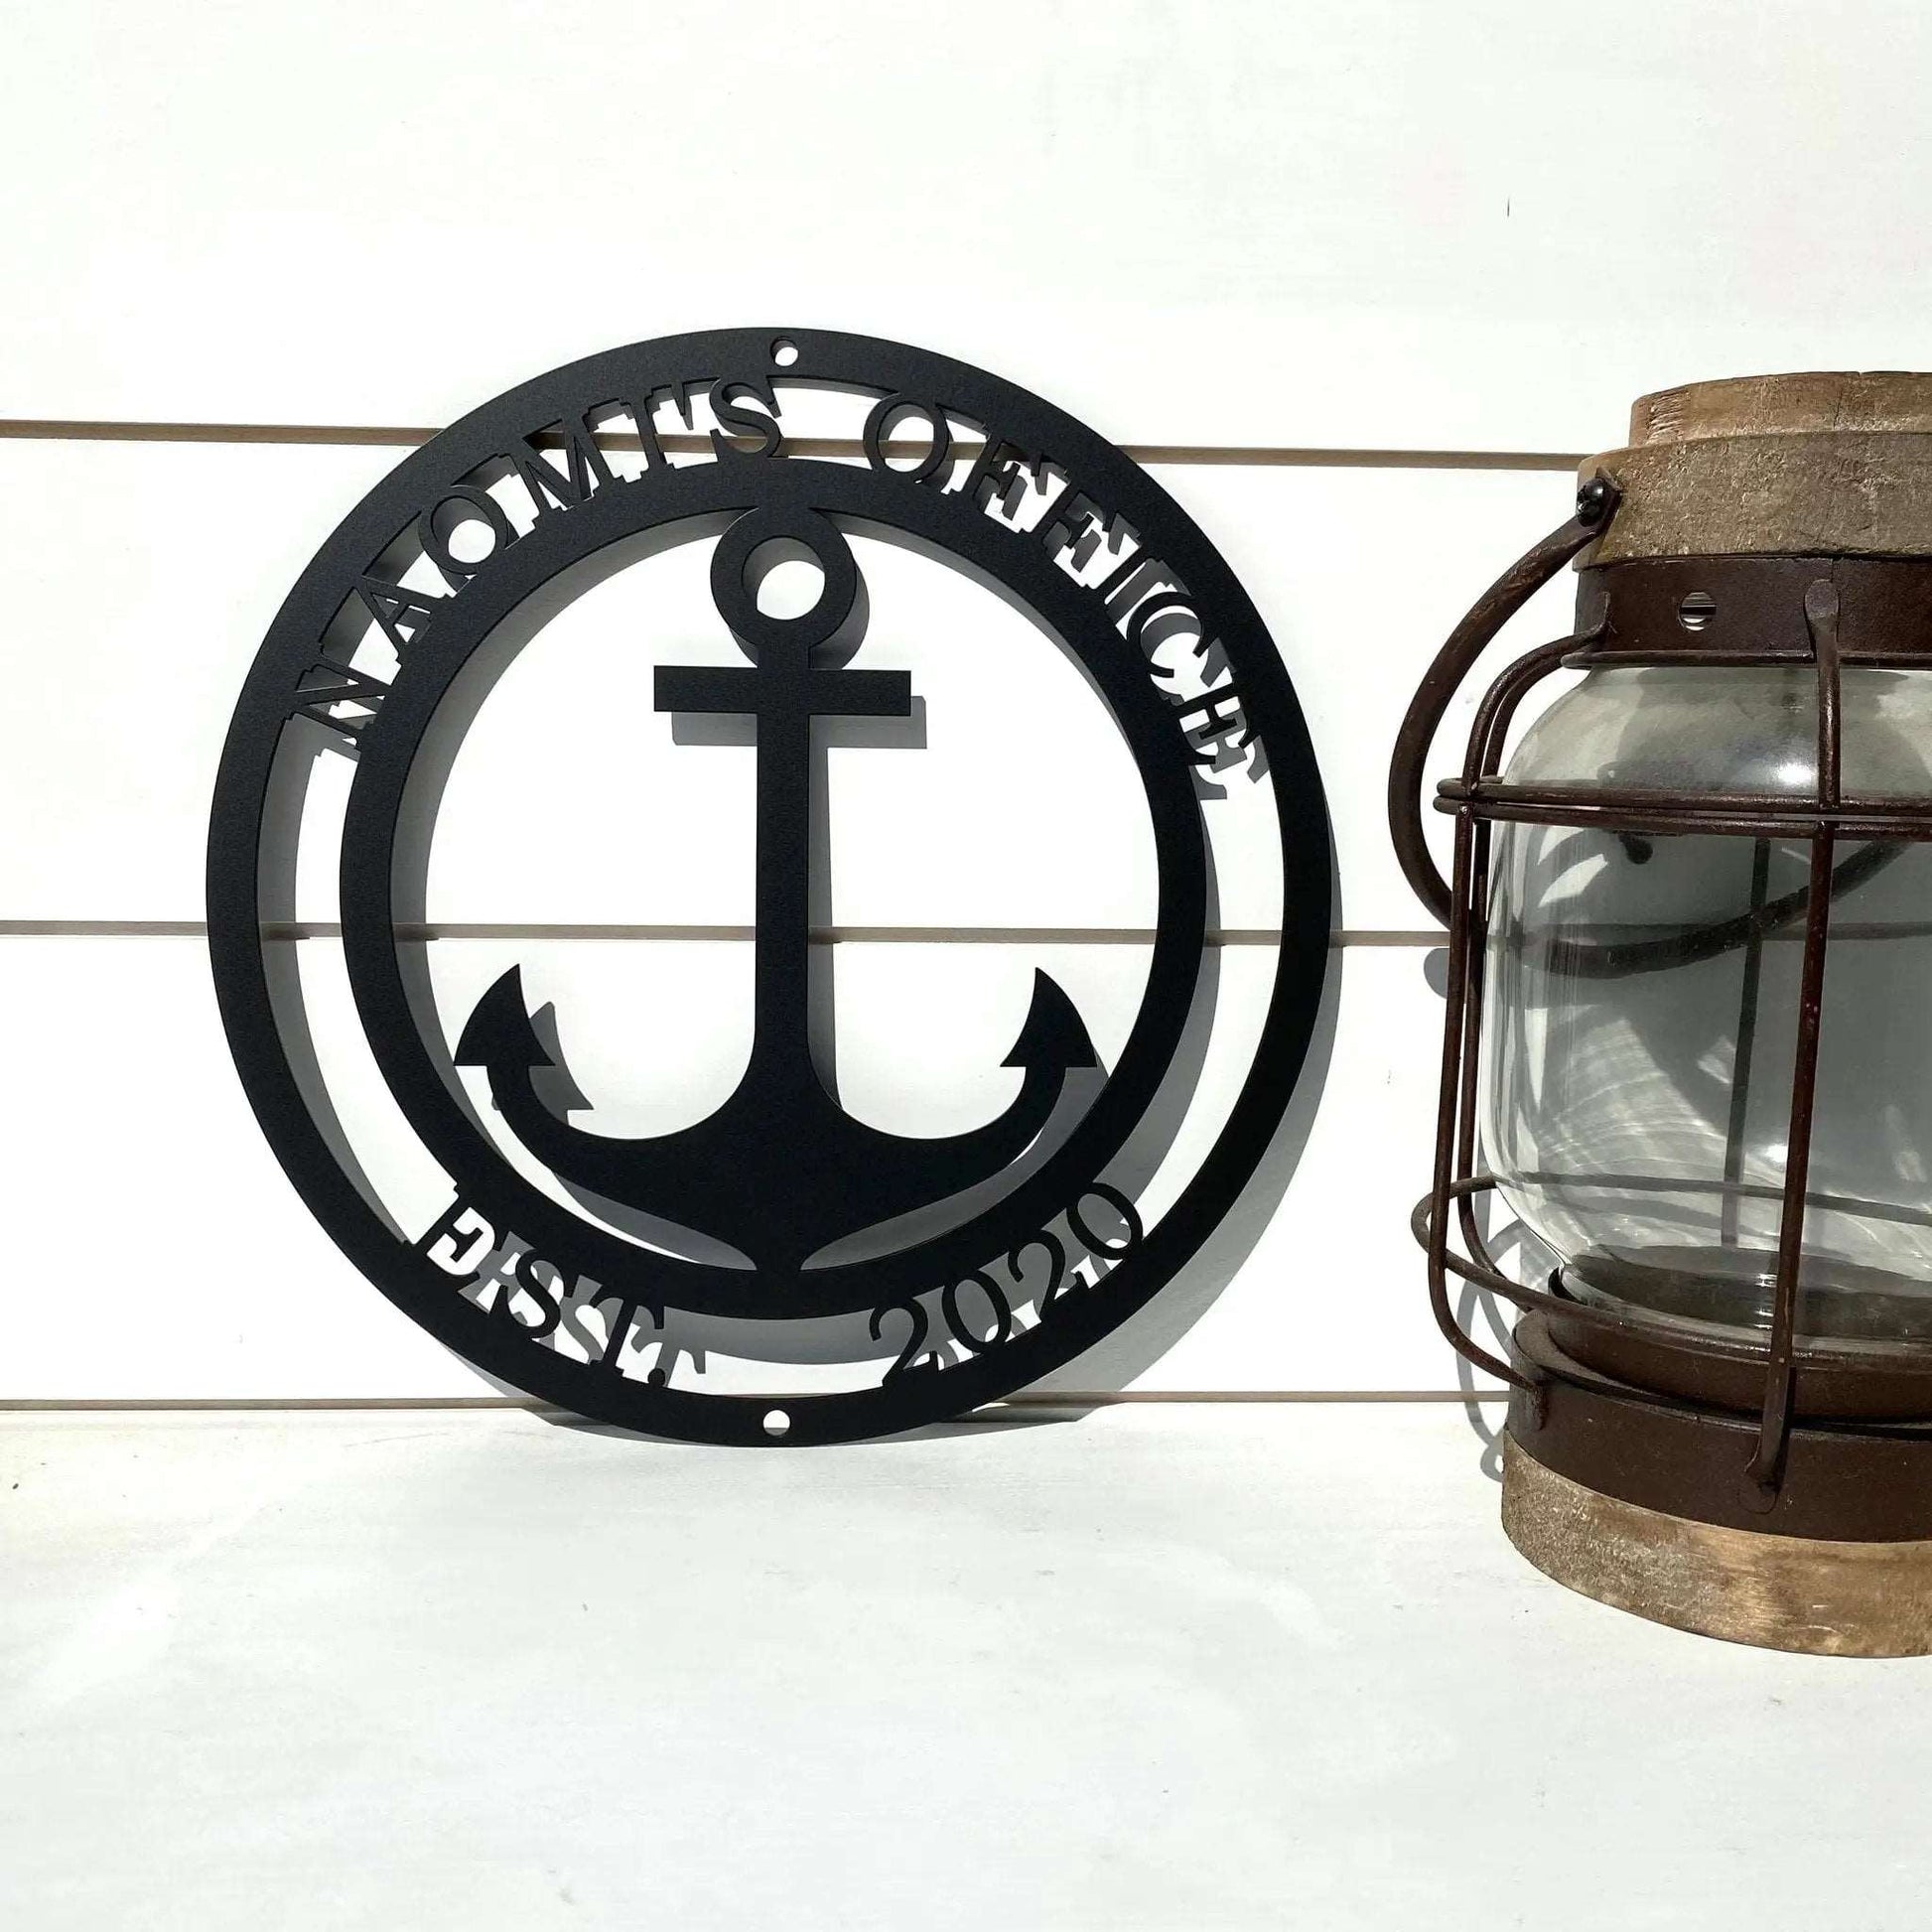 personalized anchor sign-Nautical Decor-HouseSensationsArt